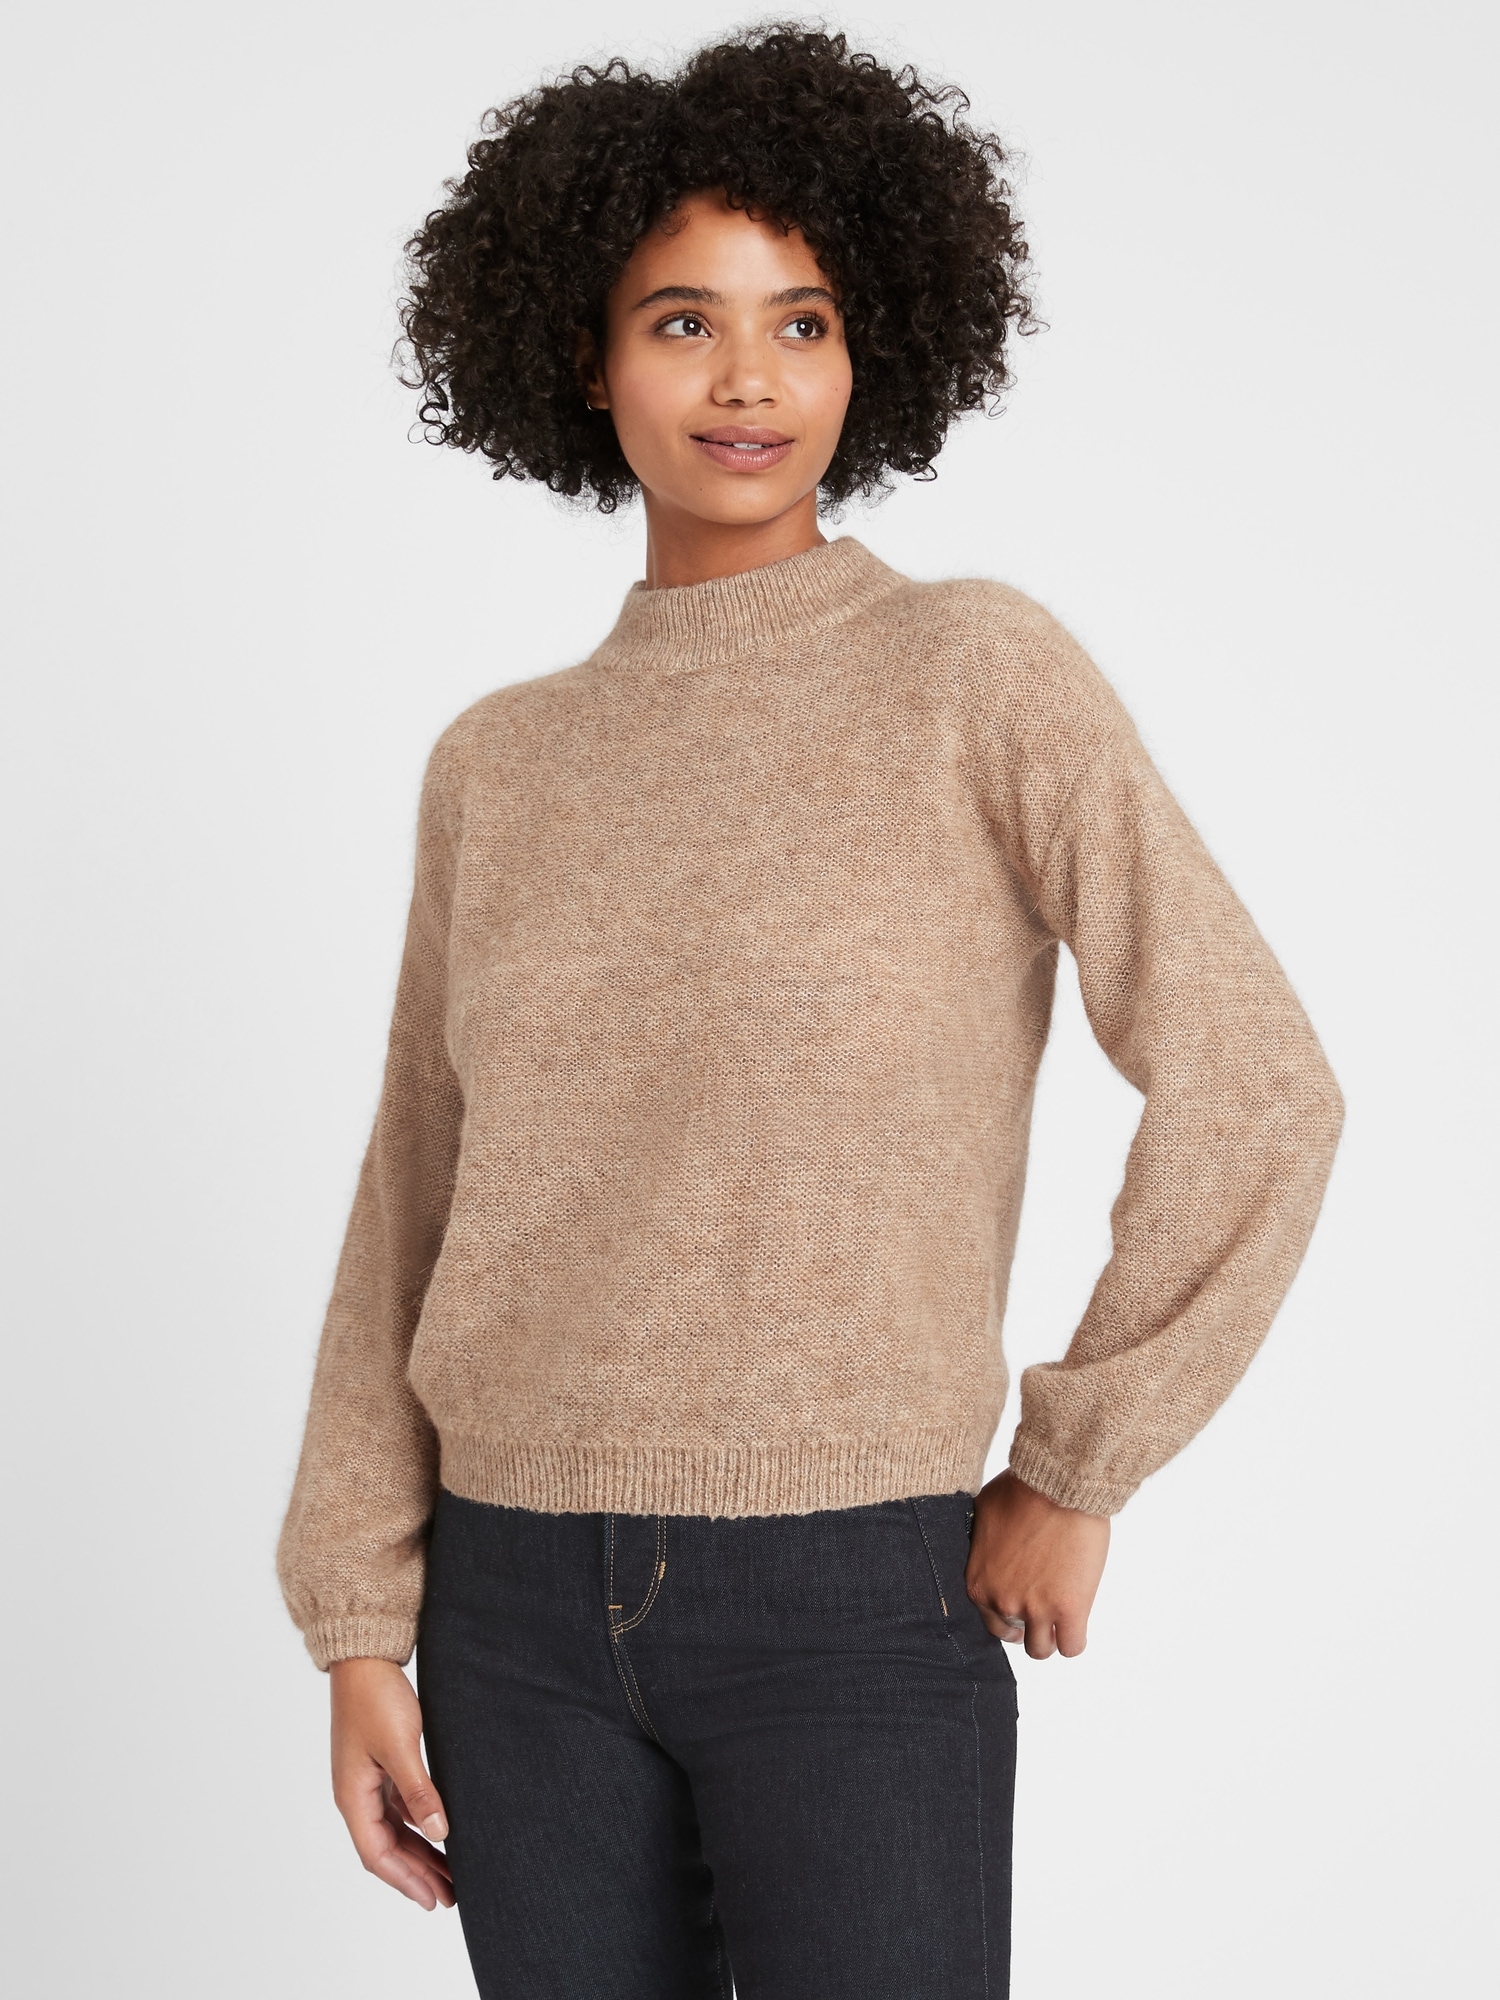 Petite Relaxed Balloon-Sleeve Sweater